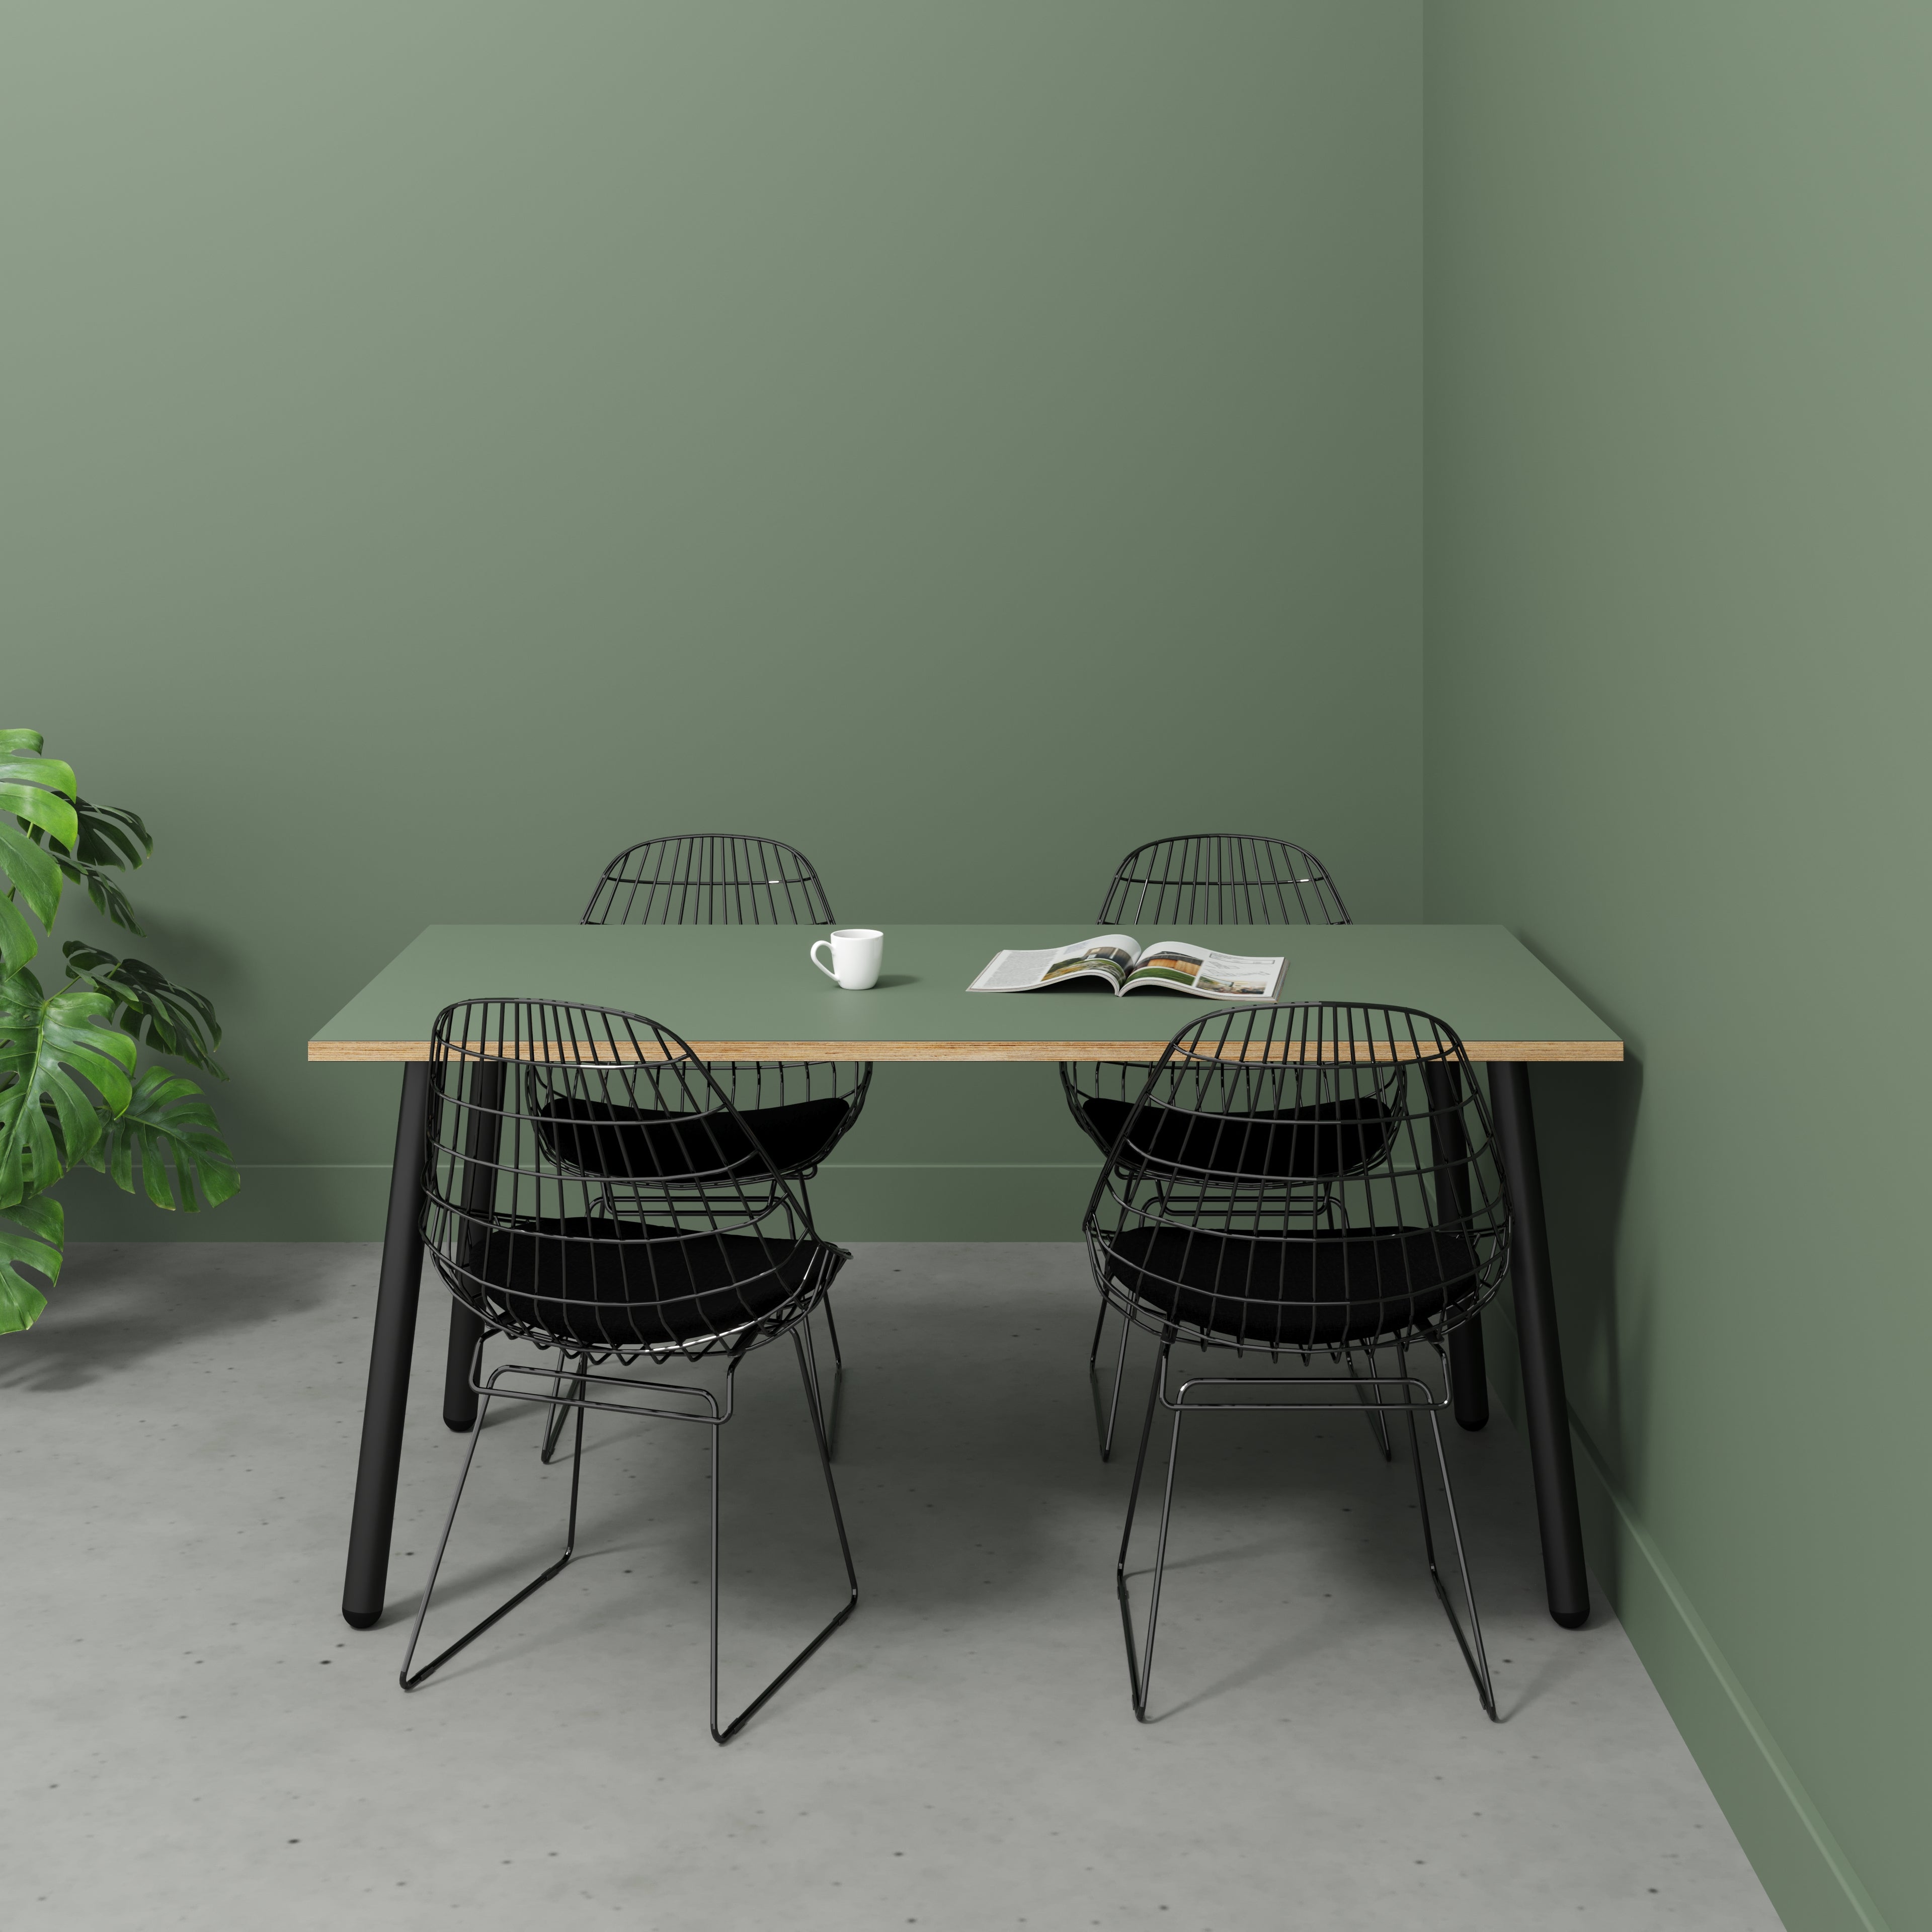 Table with Black Round Single Pin Legs - Formica Green Slate - 1600(w) x 800(d) x 735(h)